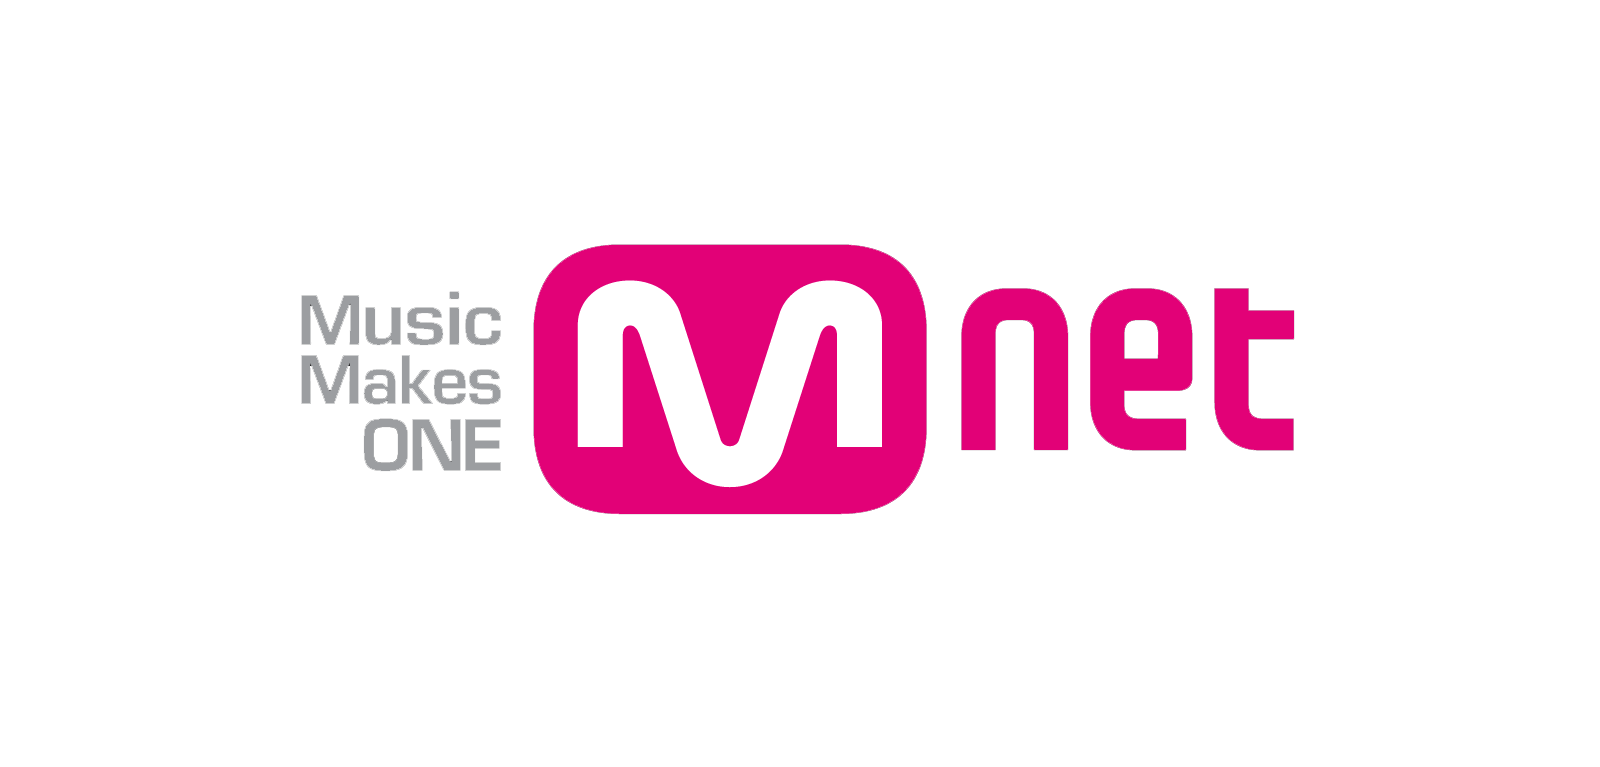 Mnet Will Held A New Survival Program Even Being Involved By Voting Manipulation Scandal